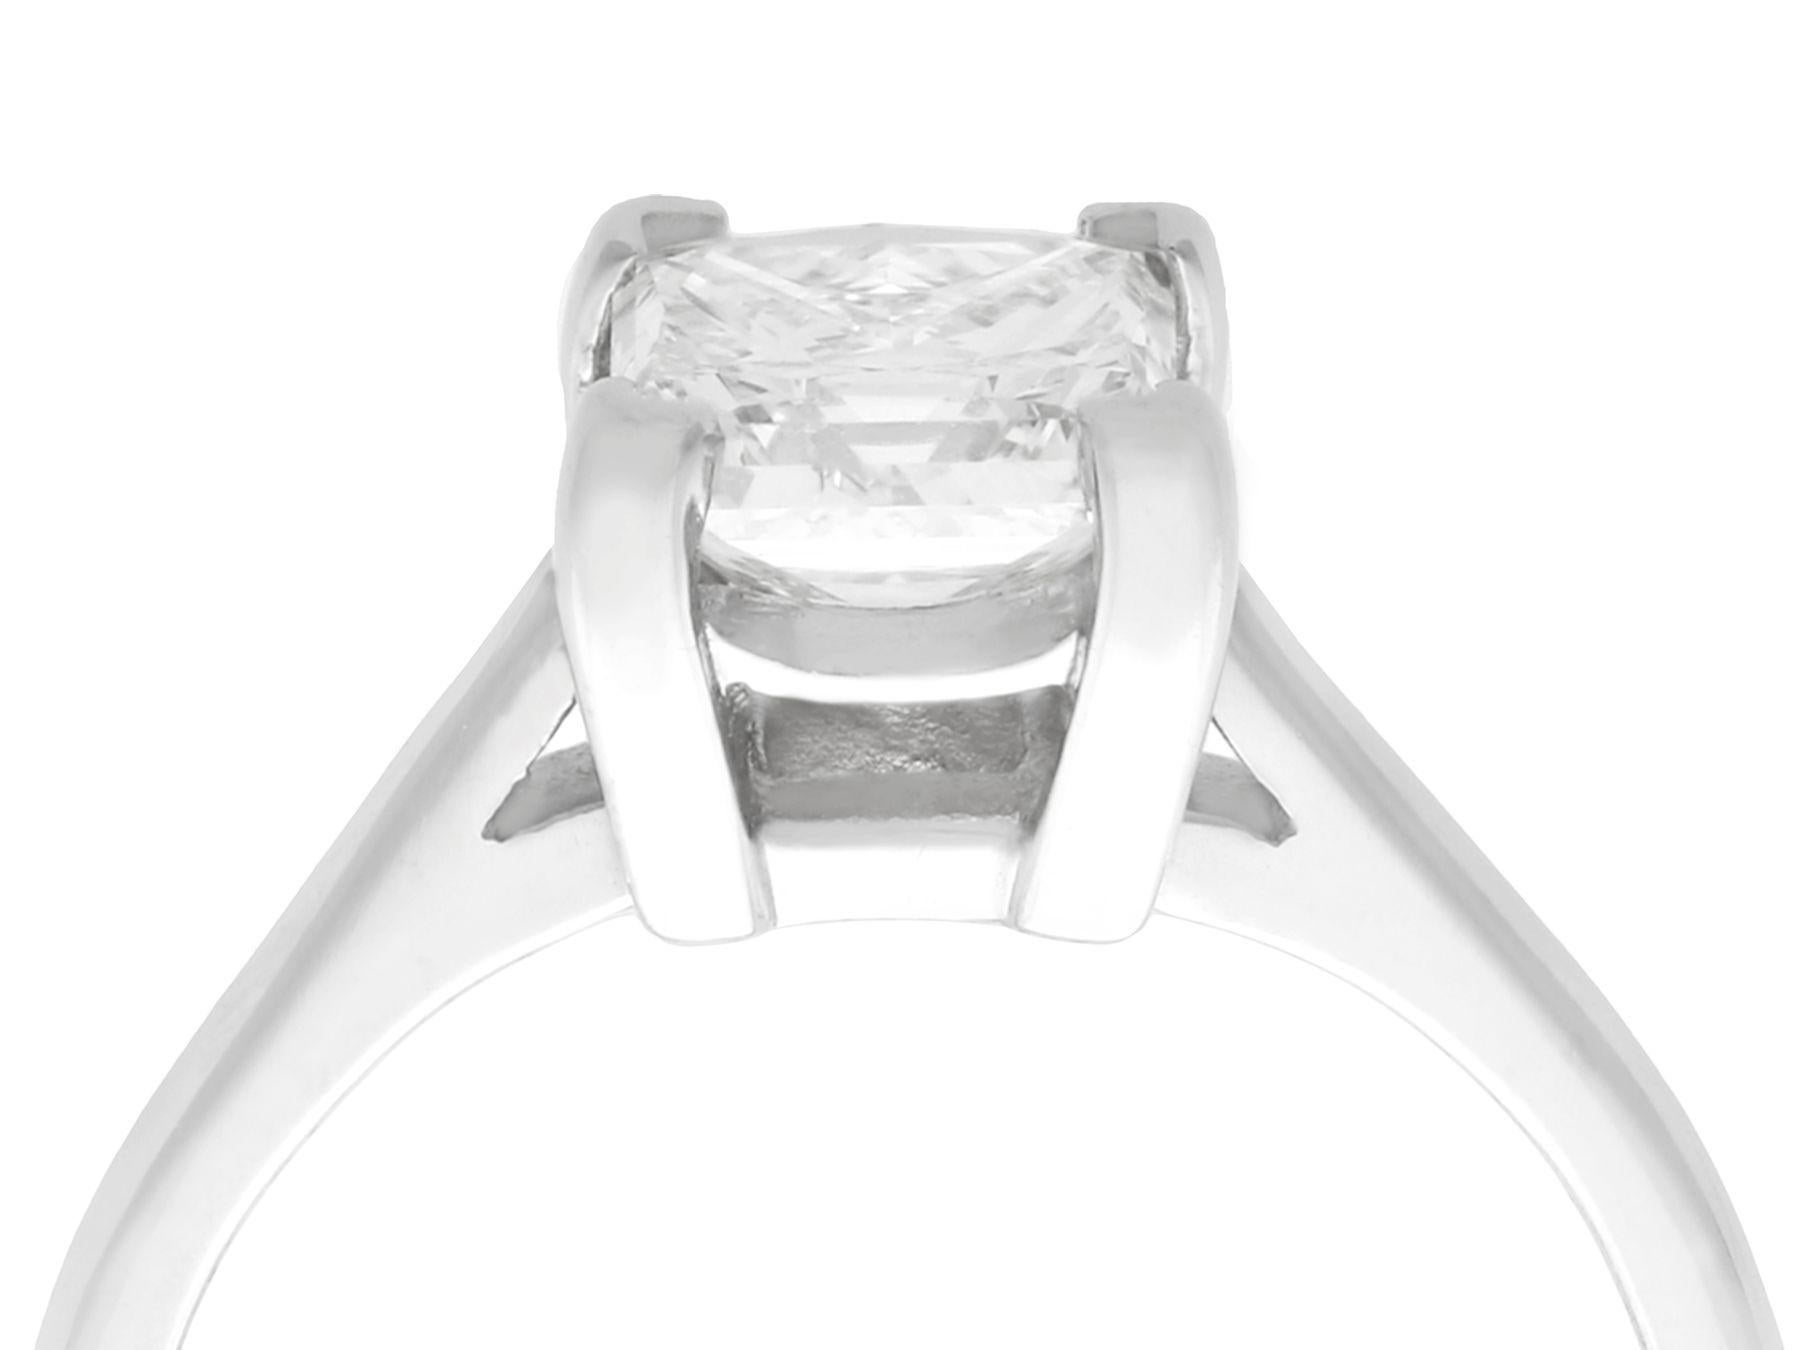 An impressive contemporary 1.22 carat princess cut diamond and platinum solitaire ring; part of our diamond engagement ring collections.

This fine and impressive contemporary princess cut diamond solitaire ring has been crafted in platinum.

The